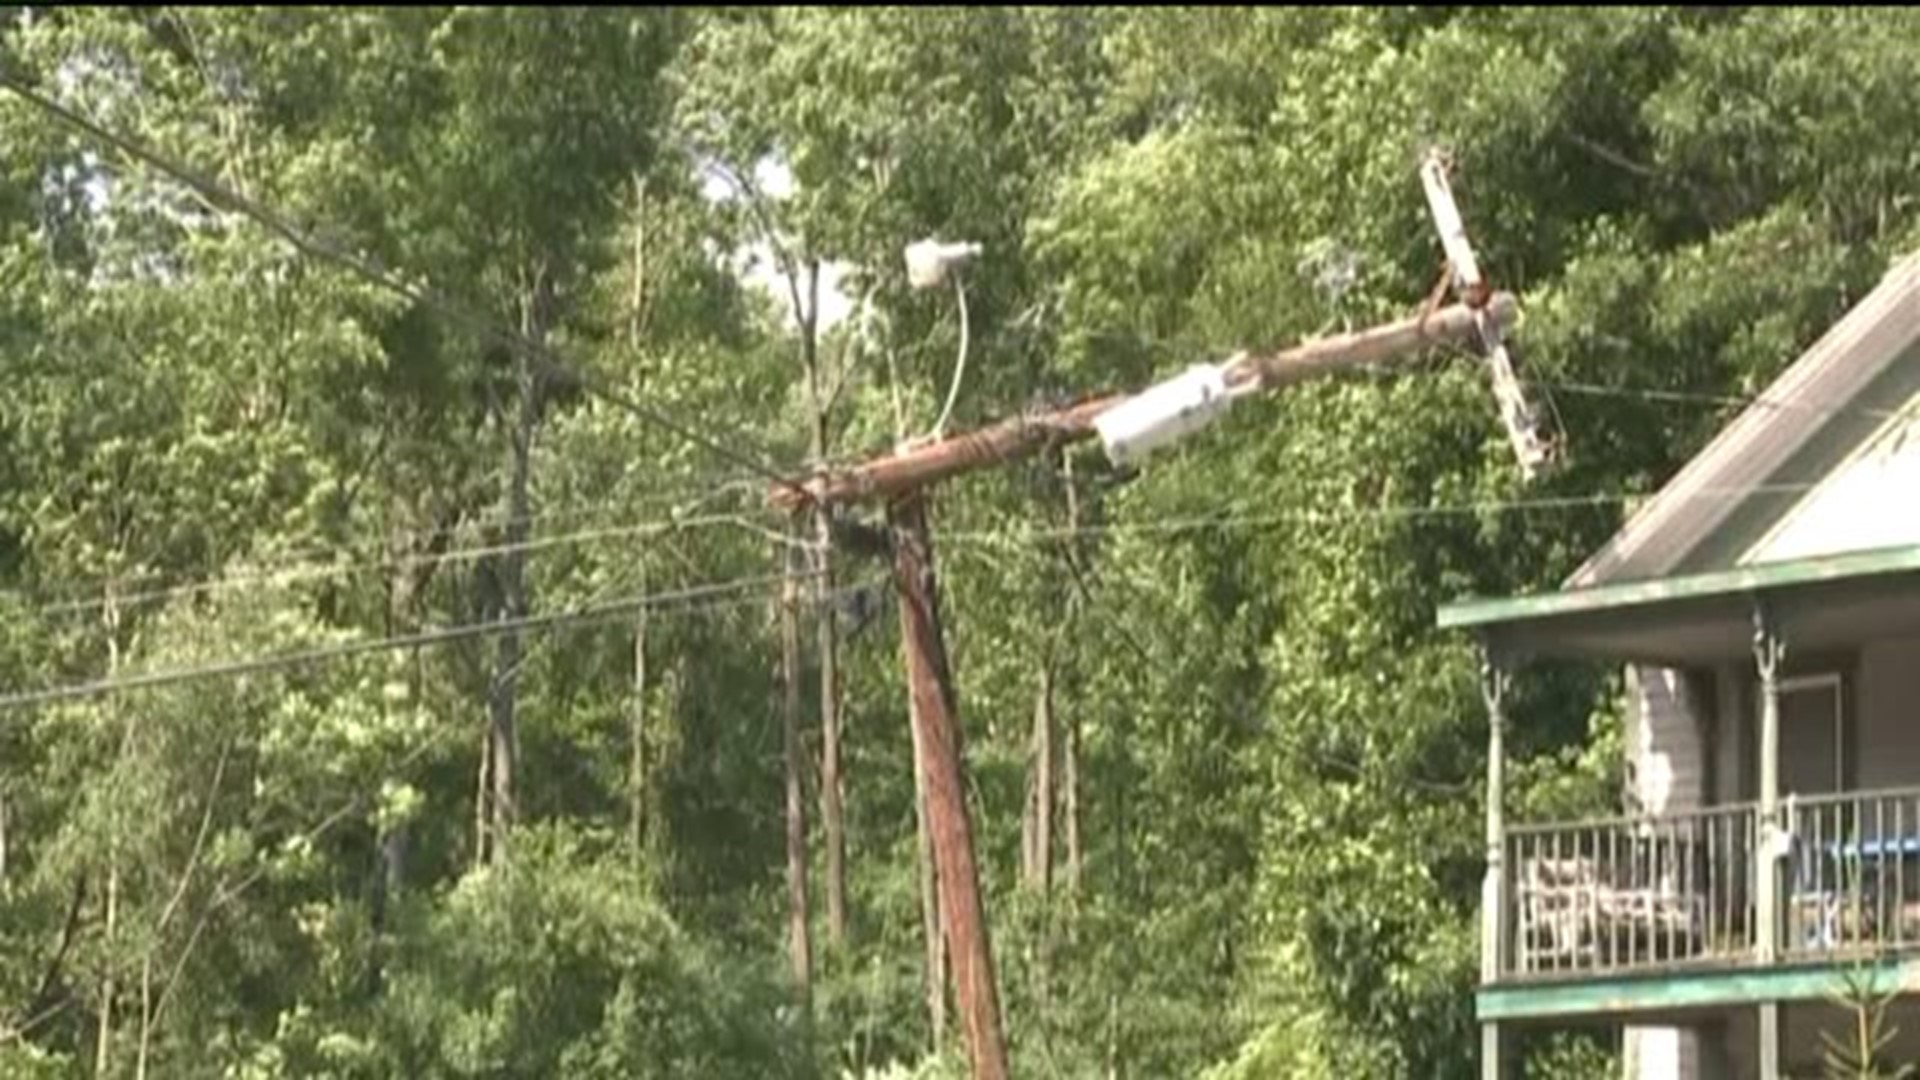 No Power Expected for Several Days